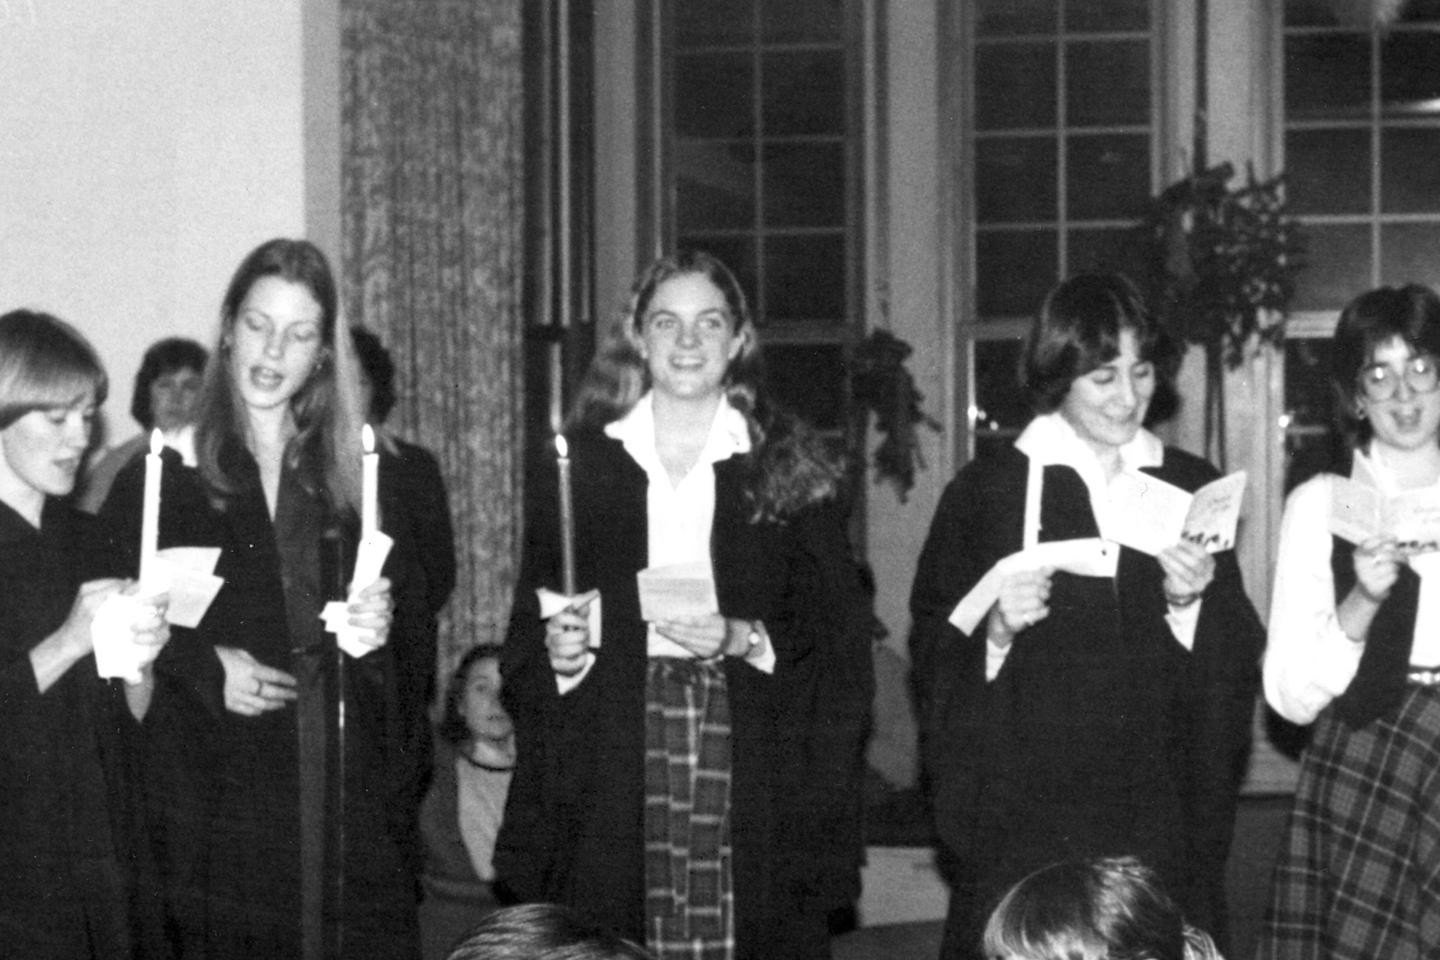 Vintage photo from 1980 showing students holding candles and singing for holidays.